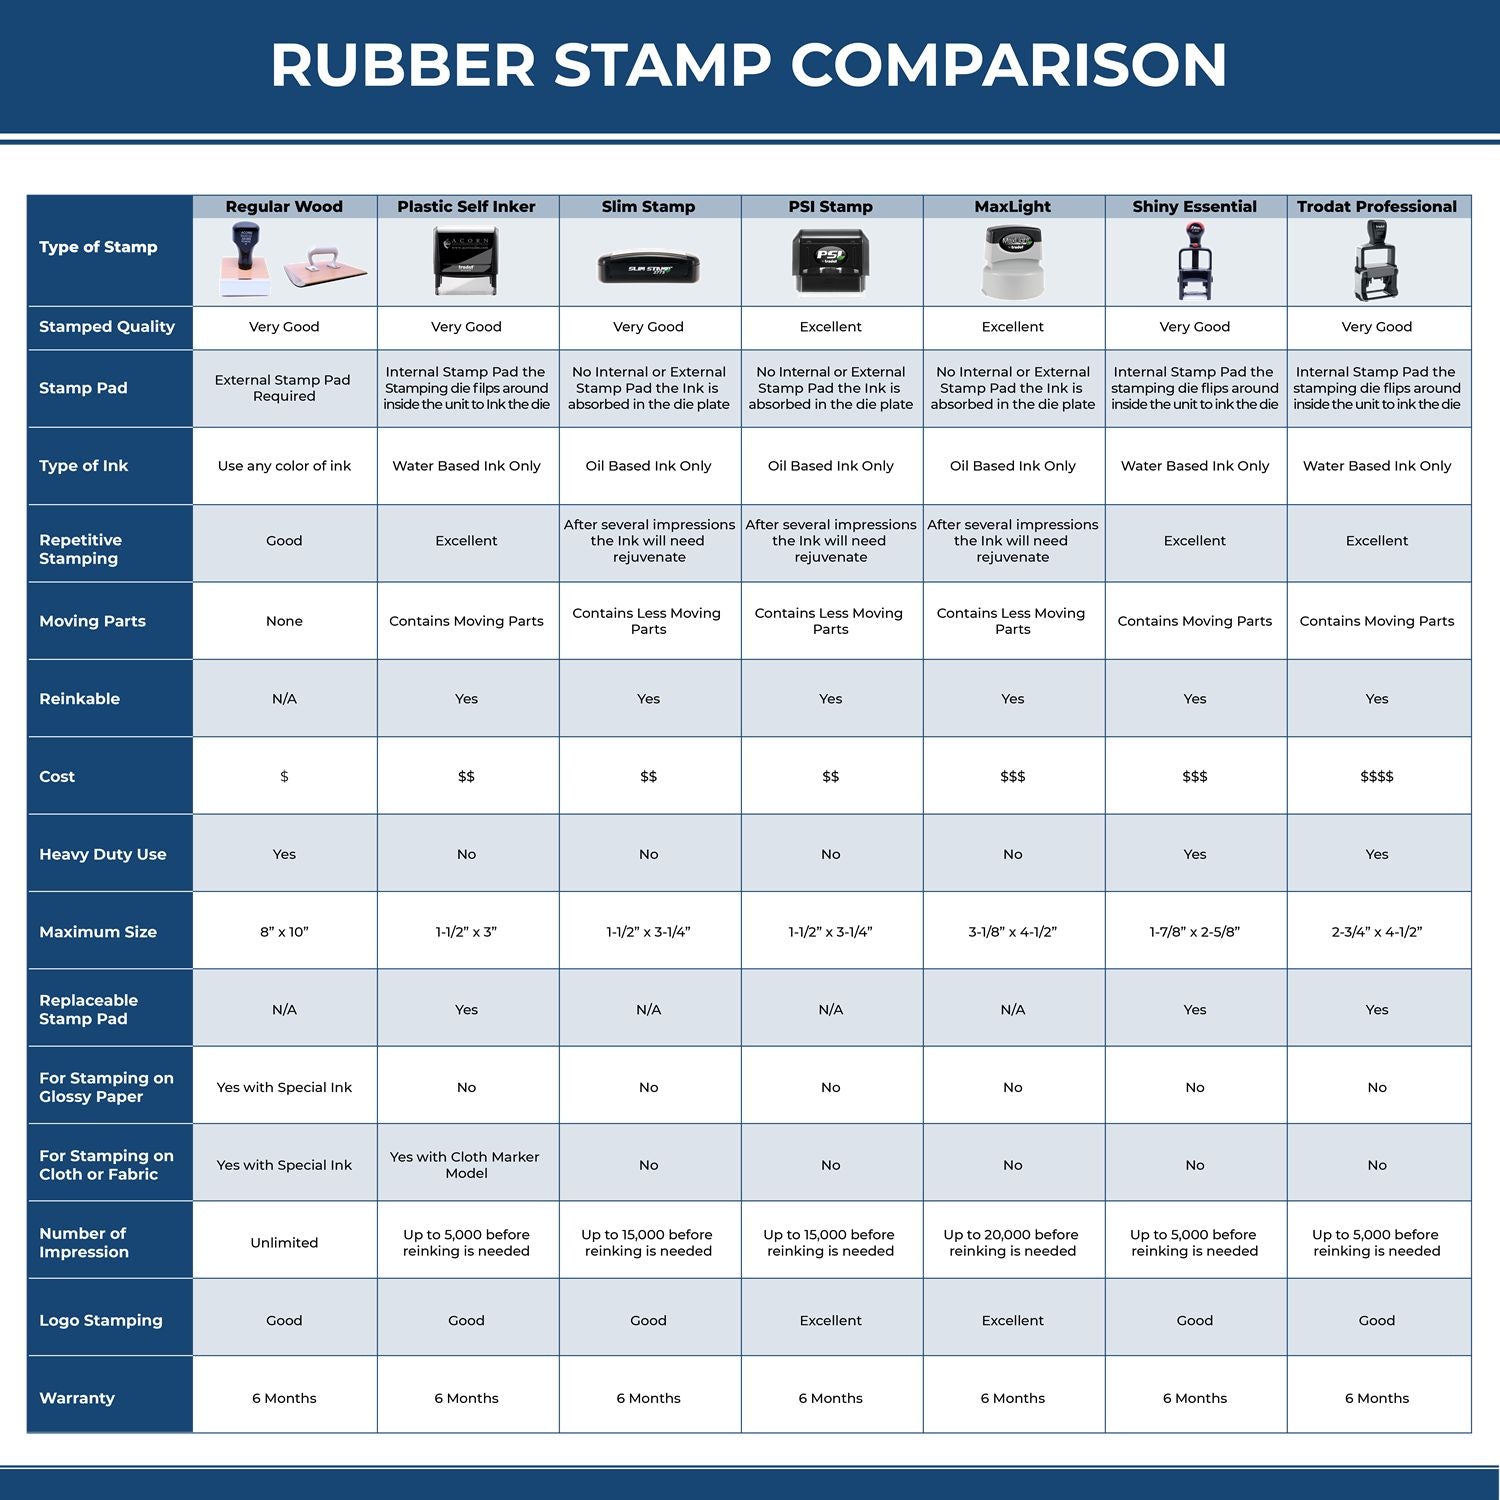 Large Self-Inking Narrow Font Urgent Stamp 5575S Rubber Stamp Comparison